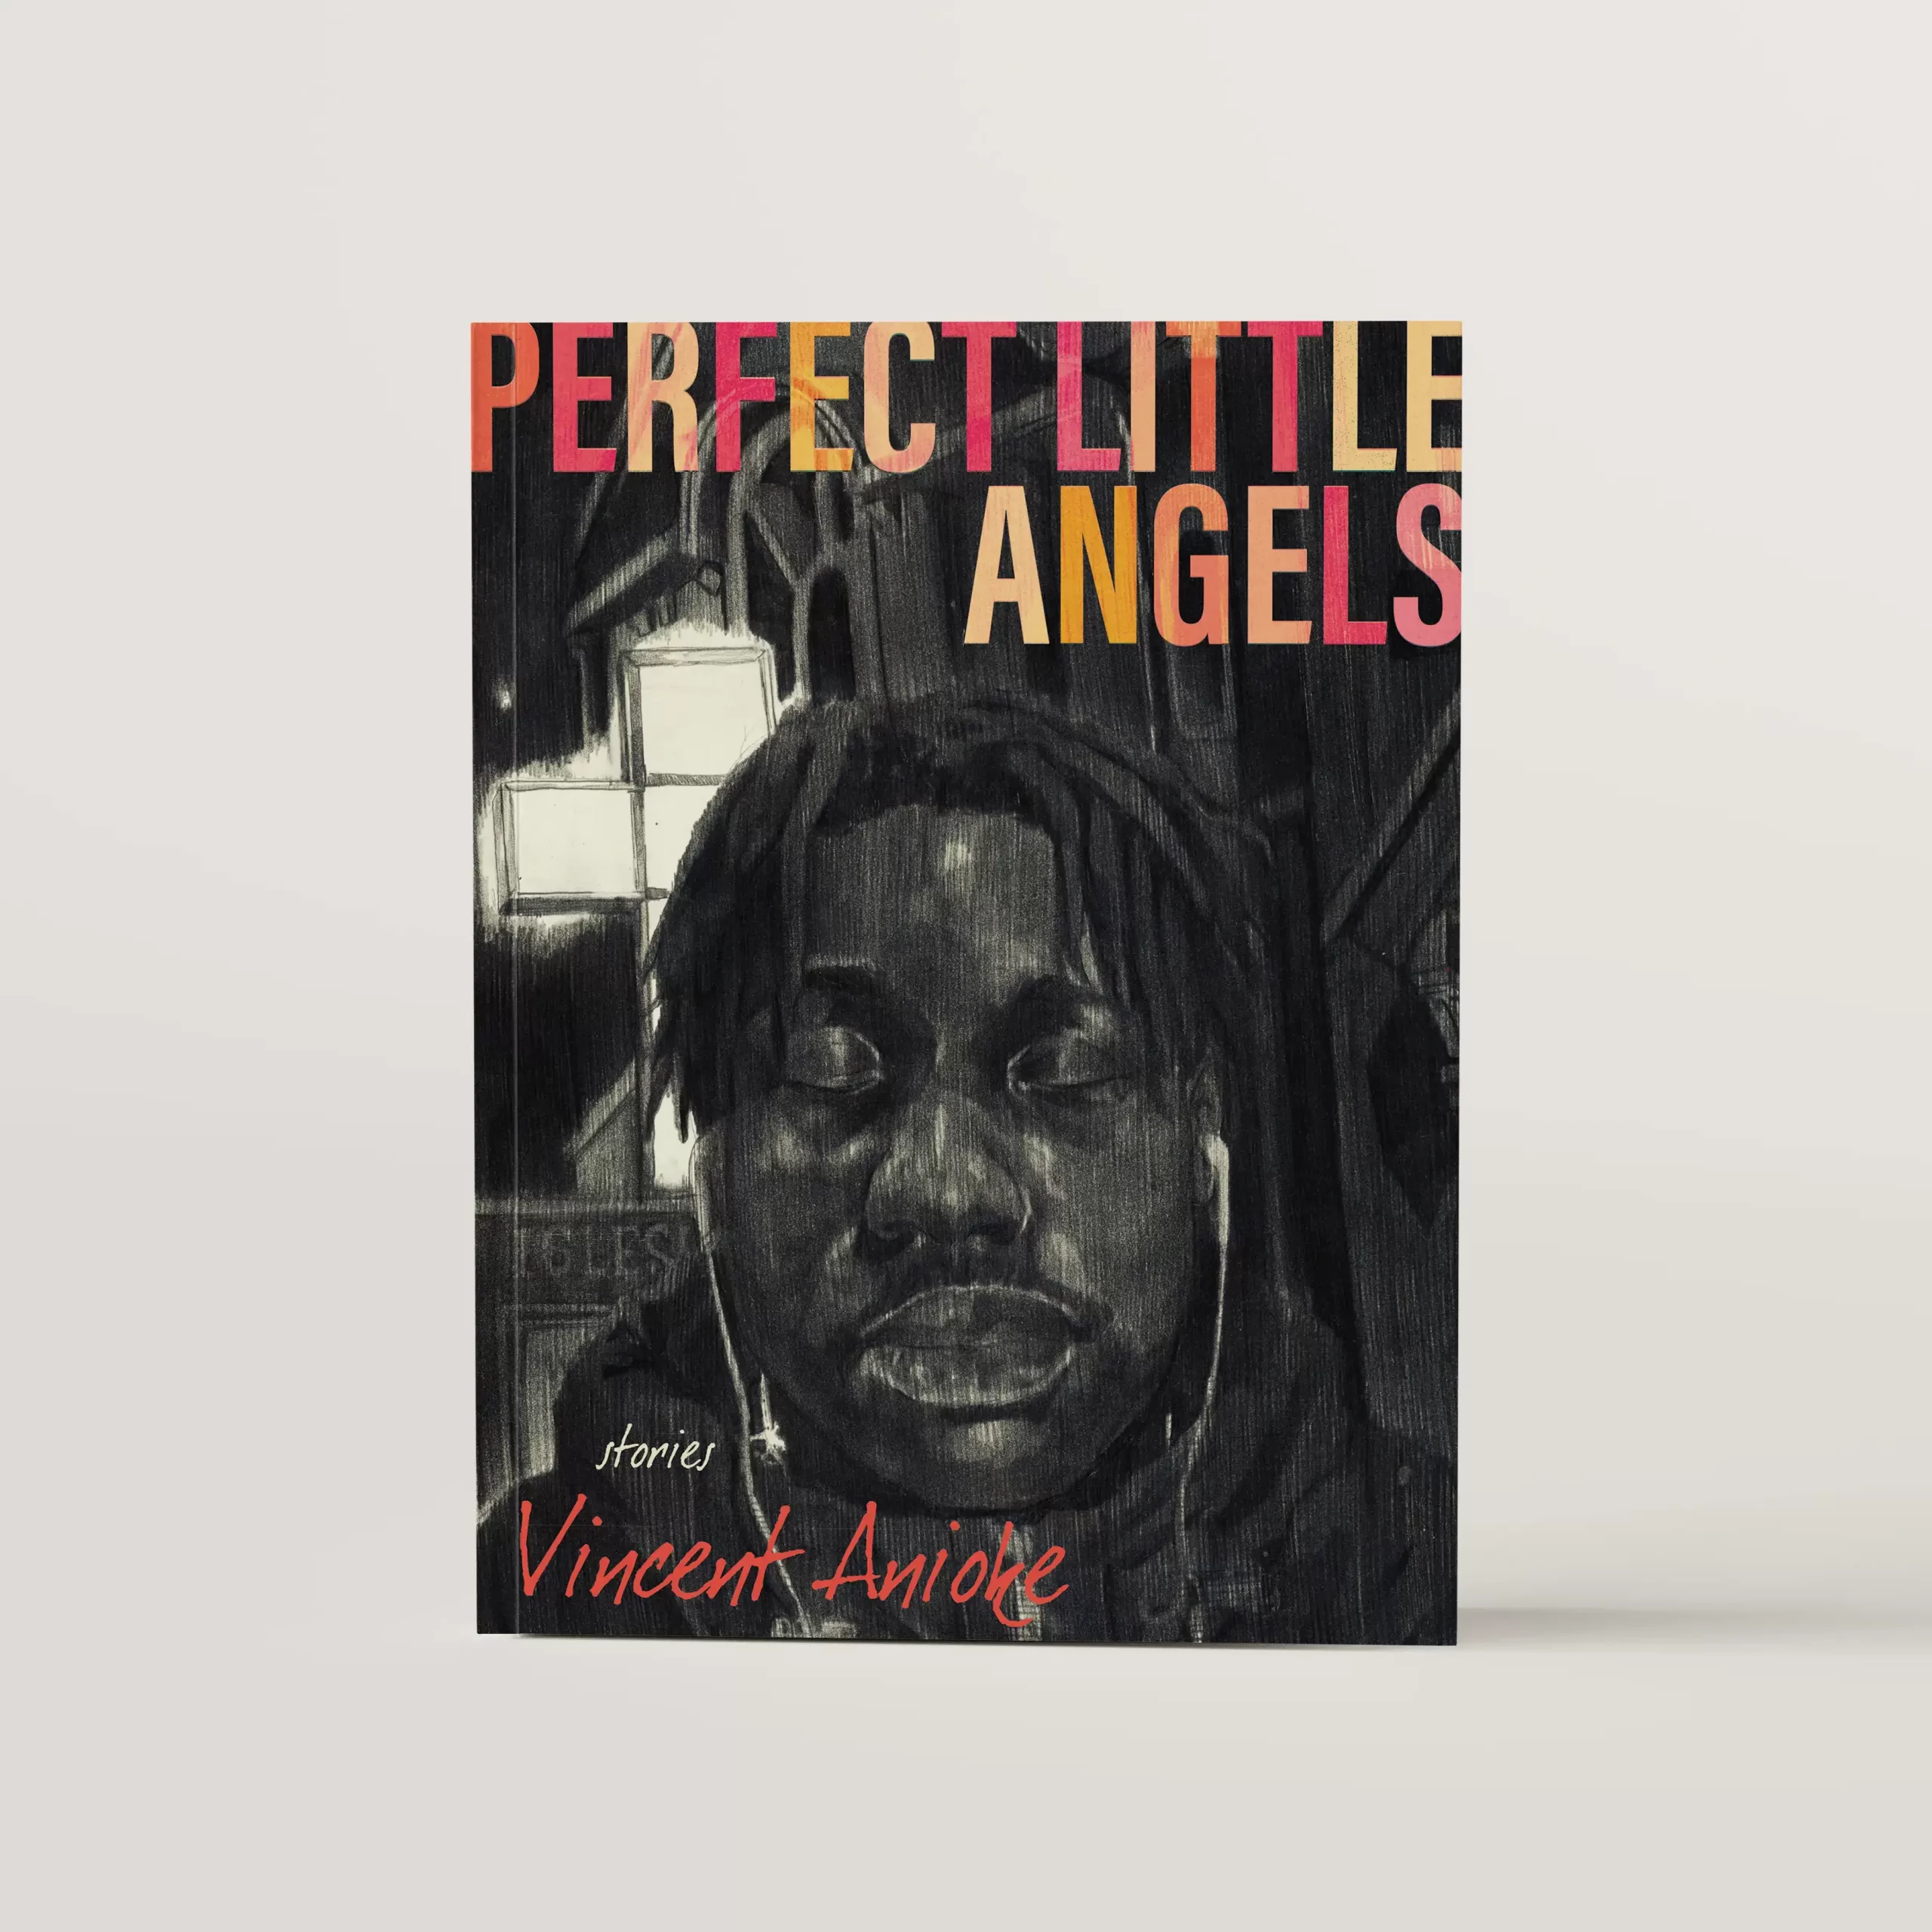 book cover for the book of short stories Perfect Little Angels by Vincent Anioke. It features an illustration of a Black man close up with headphones in and his eyes cast downward. There is a lit up cross behind him. The illustration is graphite on toned paper by Julian Adon Alexander.